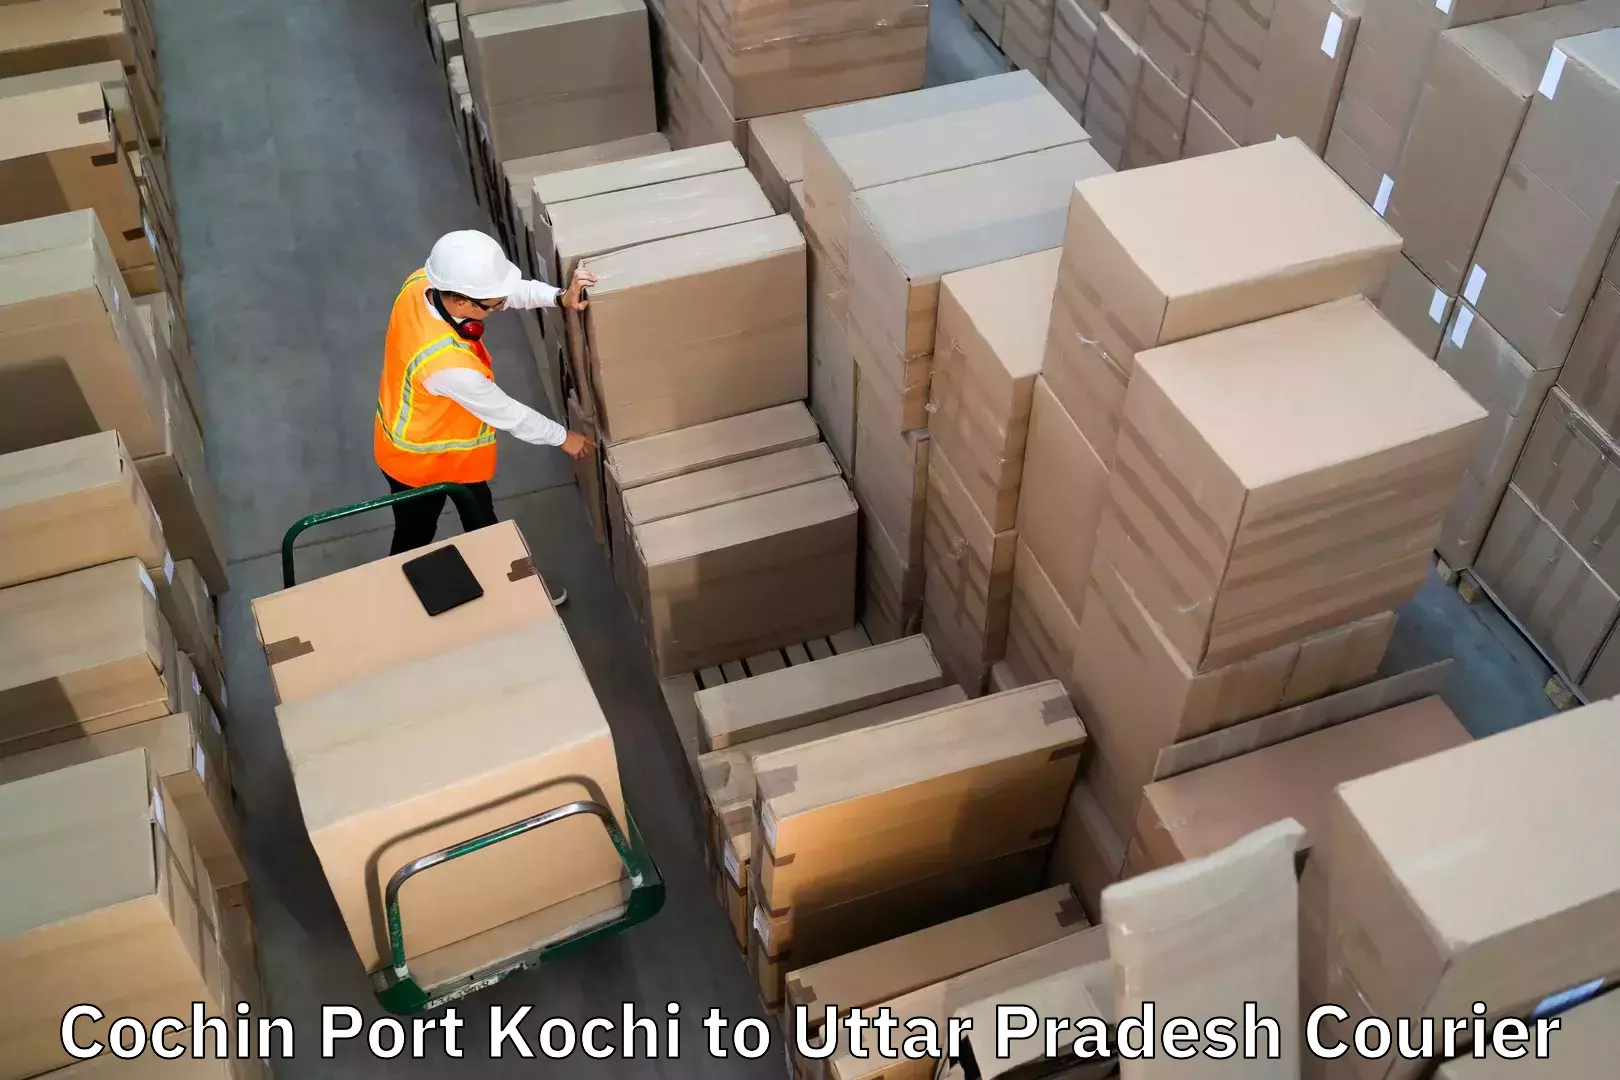 Luggage shipping service Cochin Port Kochi to IIIT Lucknow